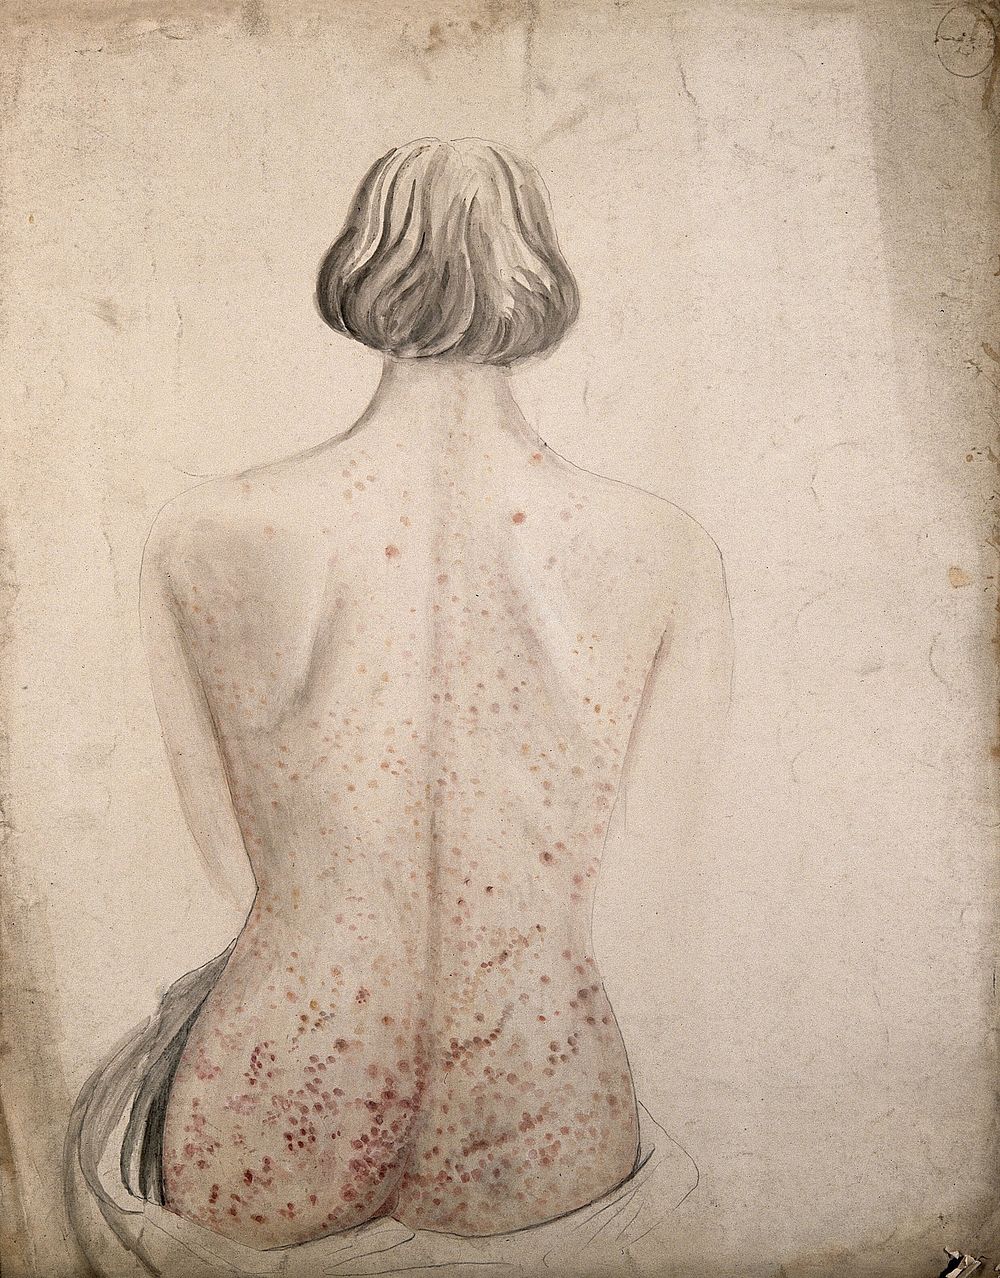 Back and buttocks of a woman suffering from a rash of sores. Watercolour by C. D'Alton, ca. 1850.